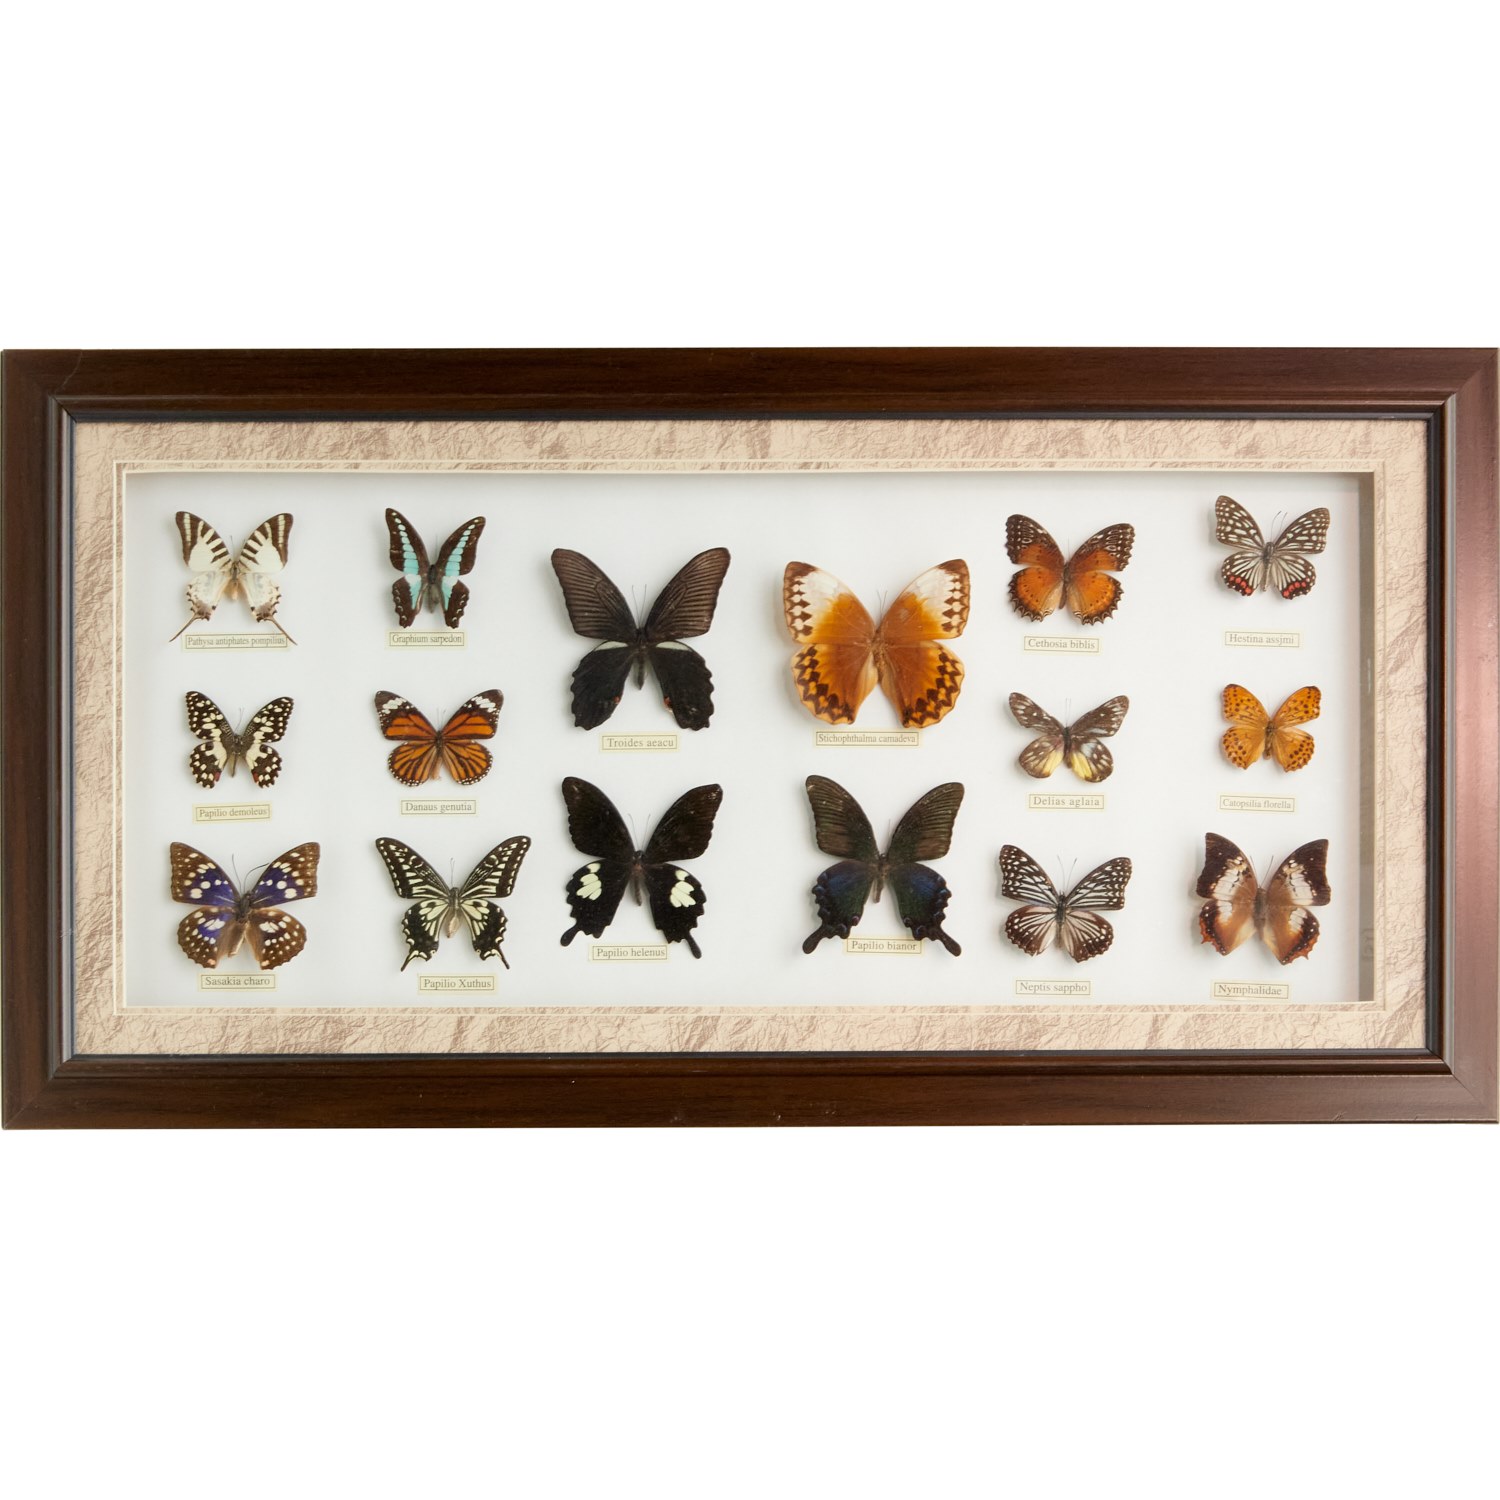 FRAMED COLLECTION OF BUTTERFLY